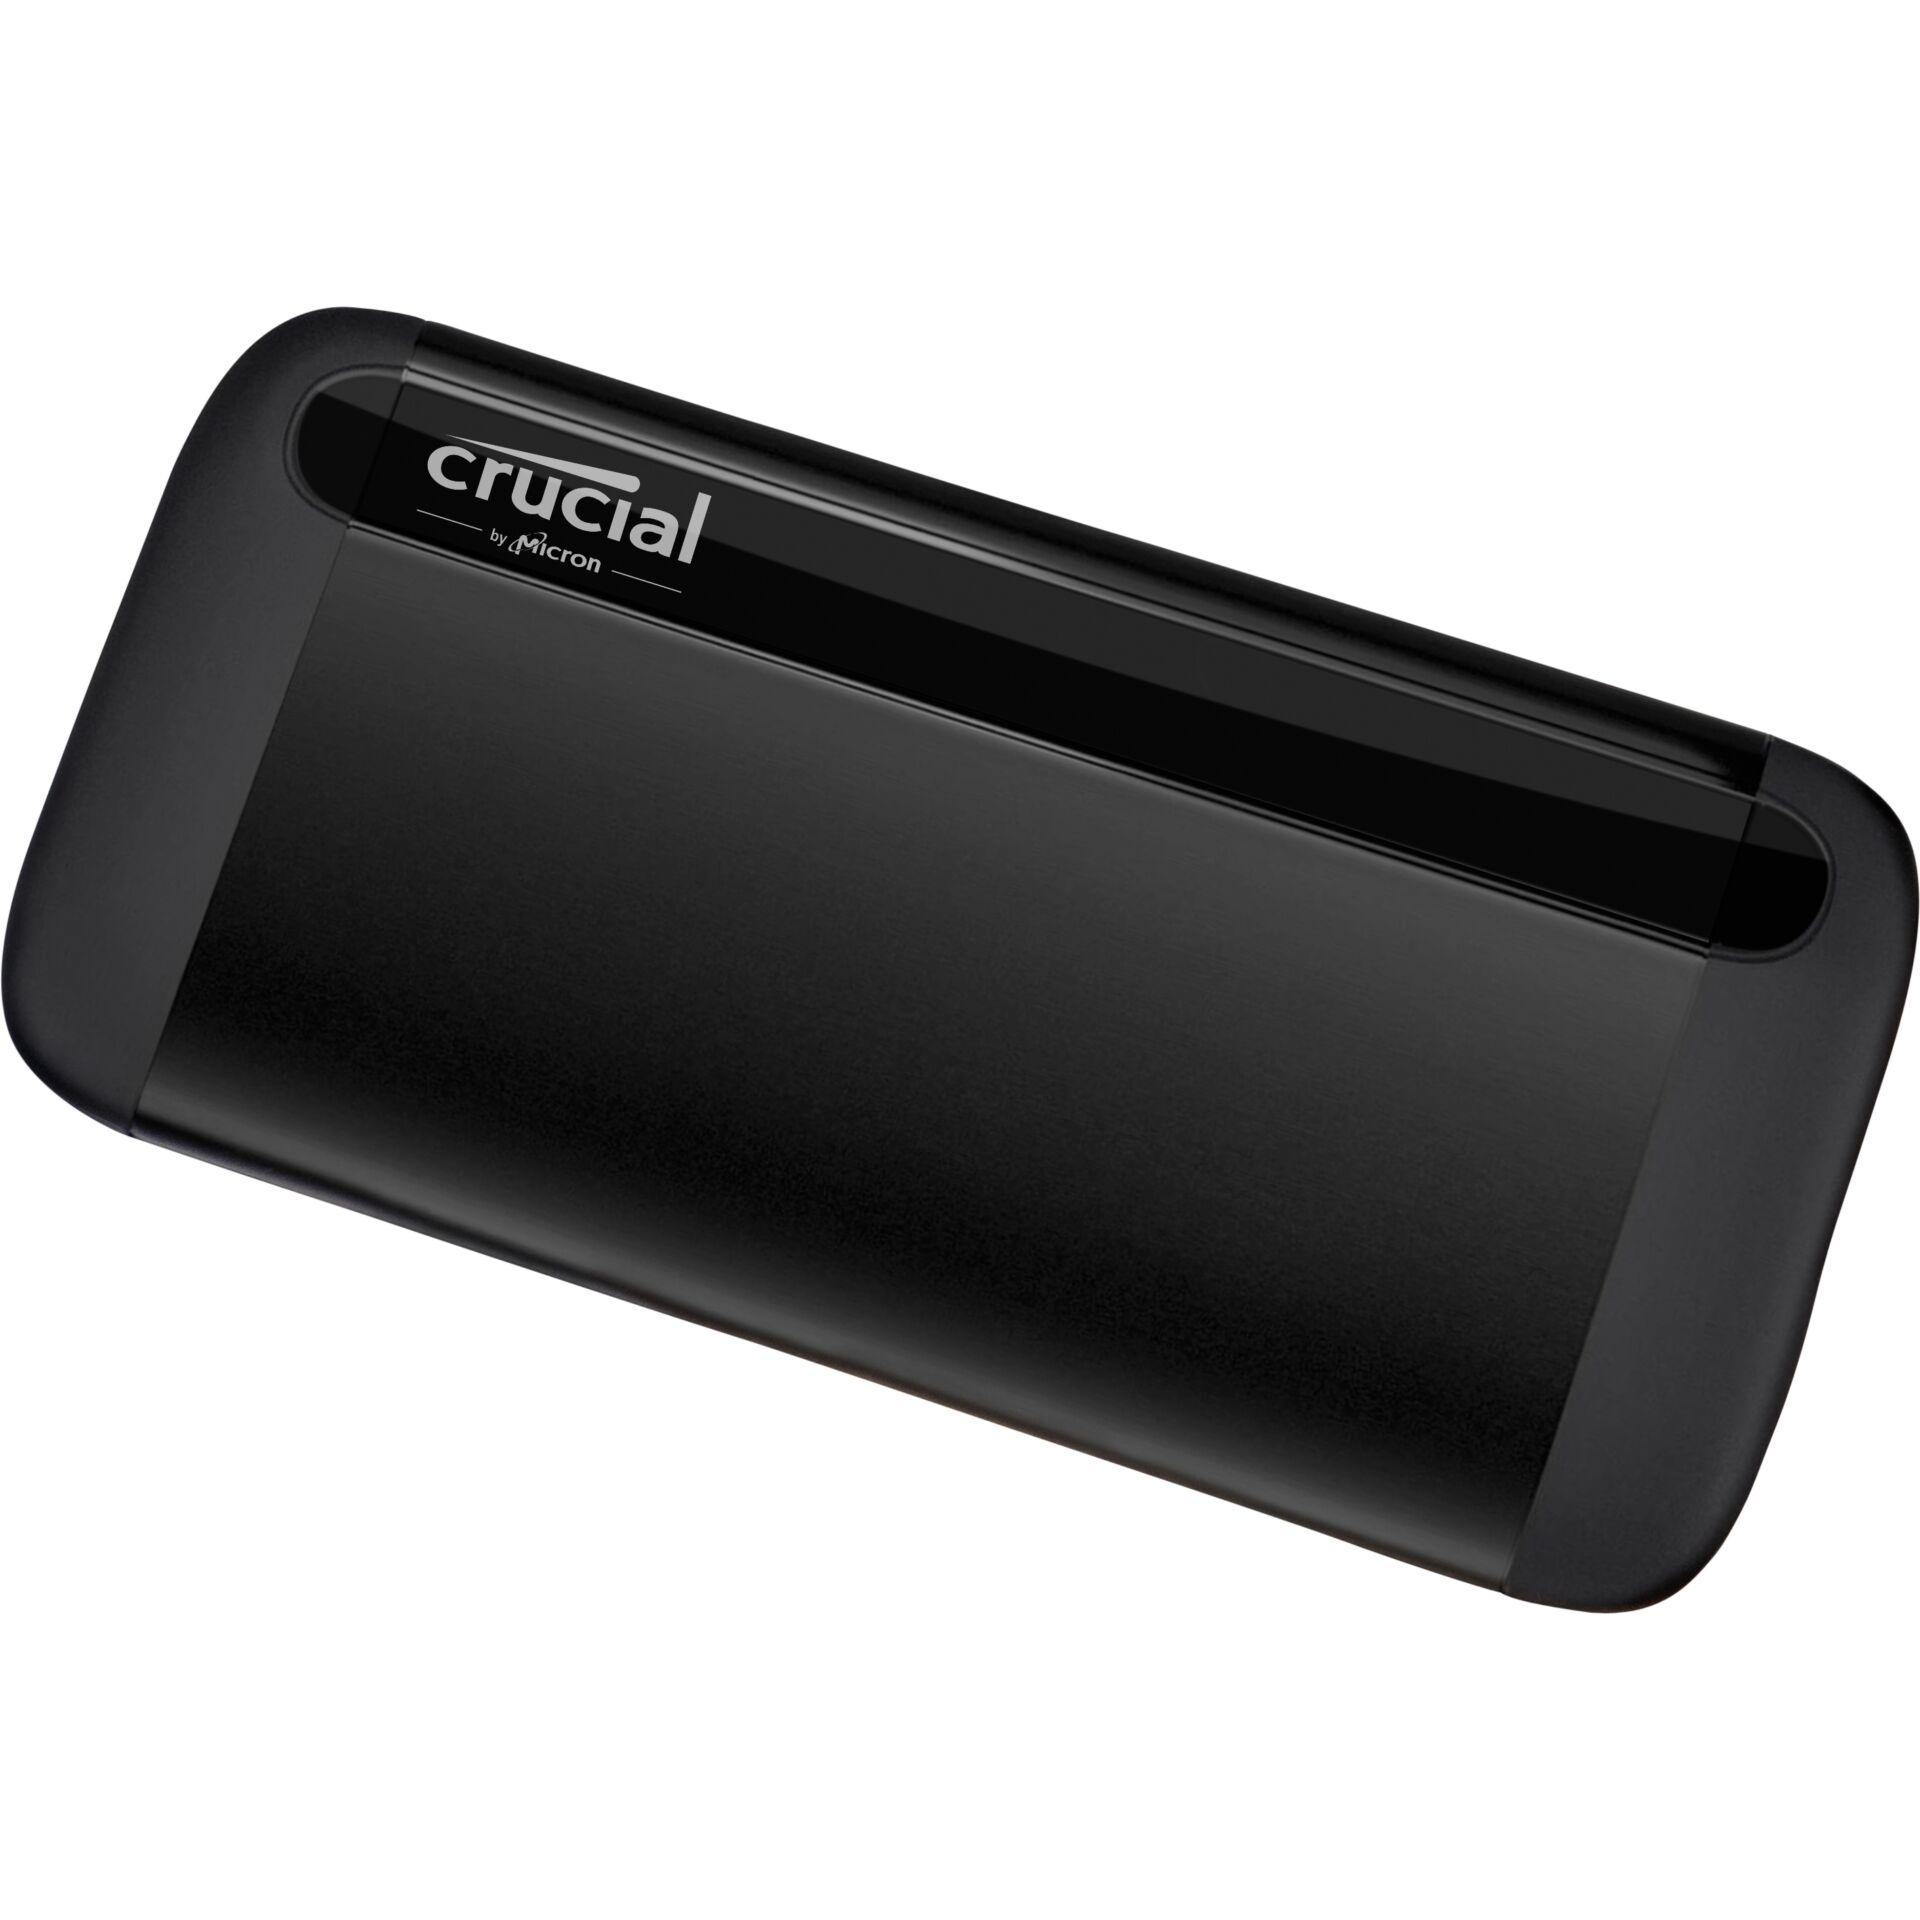 Crucial -portable SSD X8 2TB USB 3.2 Type-C -Crucial Hardware